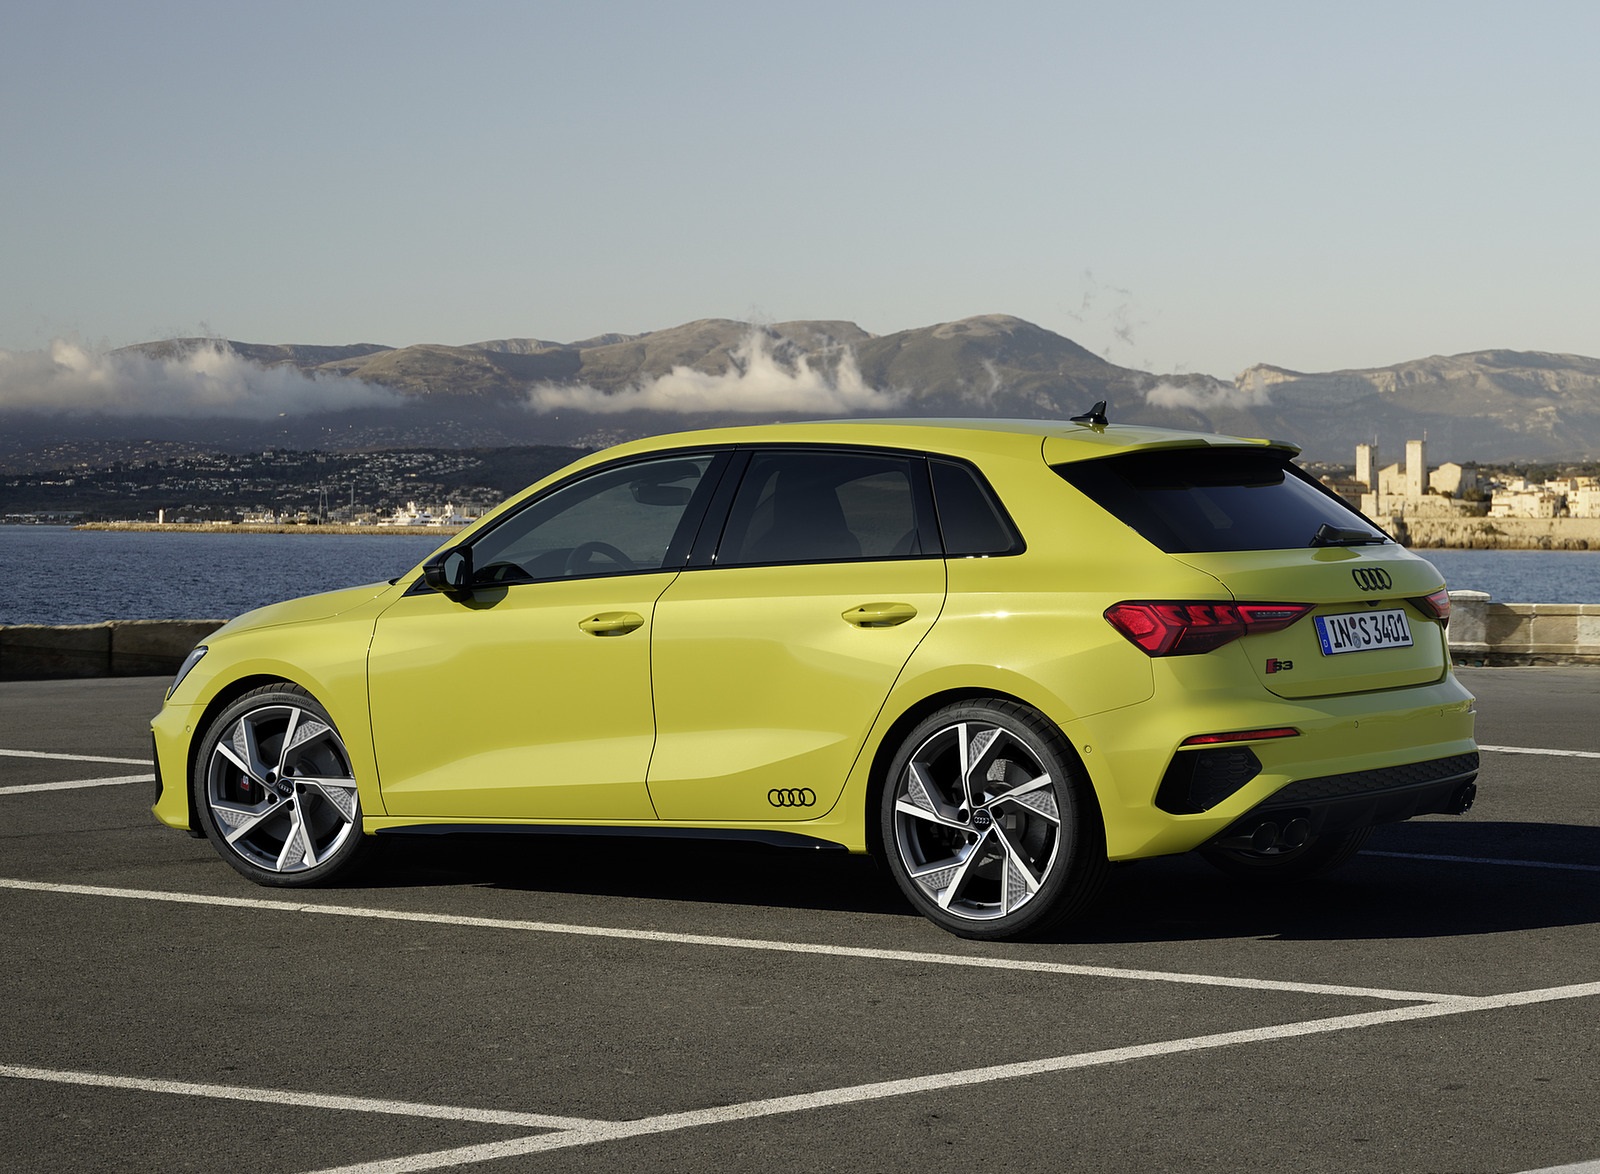 2021 Audi S3 Sportback (Color: Python Yellow) Rear Three-Quarter Wallpapers #13 of 37